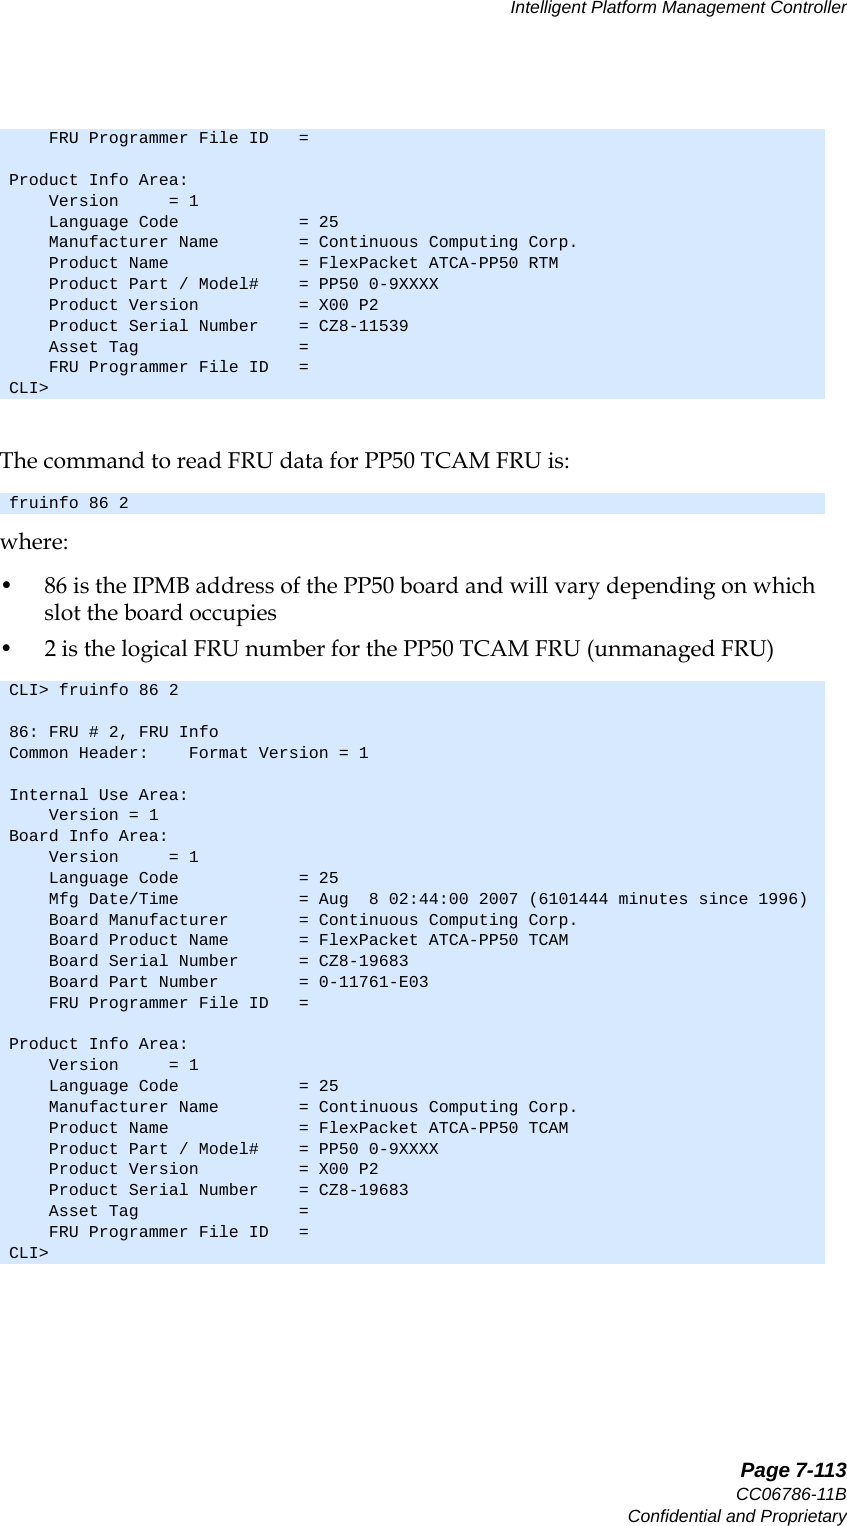   Page 7-113CC06786-11BConfidential and ProprietaryIntelligent Platform Management Controller14ABABPreliminaryThe command to read FRU data for PP50 TCAM FRU is:where:• 86 is the IPMB address of the PP50 board and will vary depending on which slot the board occupies• 2 is the logical FRU number for the PP50 TCAM FRU (unmanaged FRU)    FRU Programmer File ID   = Product Info Area:    Version     = 1    Language Code            = 25    Manufacturer Name        = Continuous Computing Corp.    Product Name             = FlexPacket ATCA-PP50 RTM    Product Part / Model#    = PP50 0-9XXXX    Product Version          = X00 P2    Product Serial Number    = CZ8-11539    Asset Tag                =     FRU Programmer File ID   = CLI&gt; fruinfo 86 2CLI&gt; fruinfo 86 286: FRU # 2, FRU InfoCommon Header:    Format Version = 1Internal Use Area:    Version = 1Board Info Area:    Version     = 1    Language Code            = 25    Mfg Date/Time            = Aug  8 02:44:00 2007 (6101444 minutes since 1996)    Board Manufacturer       = Continuous Computing Corp.    Board Product Name       = FlexPacket ATCA-PP50 TCAM    Board Serial Number      = CZ8-19683    Board Part Number        = 0-11761-E03    FRU Programmer File ID   = Product Info Area:    Version     = 1    Language Code            = 25    Manufacturer Name        = Continuous Computing Corp.    Product Name             = FlexPacket ATCA-PP50 TCAM    Product Part / Model#    = PP50 0-9XXXX    Product Version          = X00 P2    Product Serial Number    = CZ8-19683    Asset Tag                =     FRU Programmer File ID   = CLI&gt;